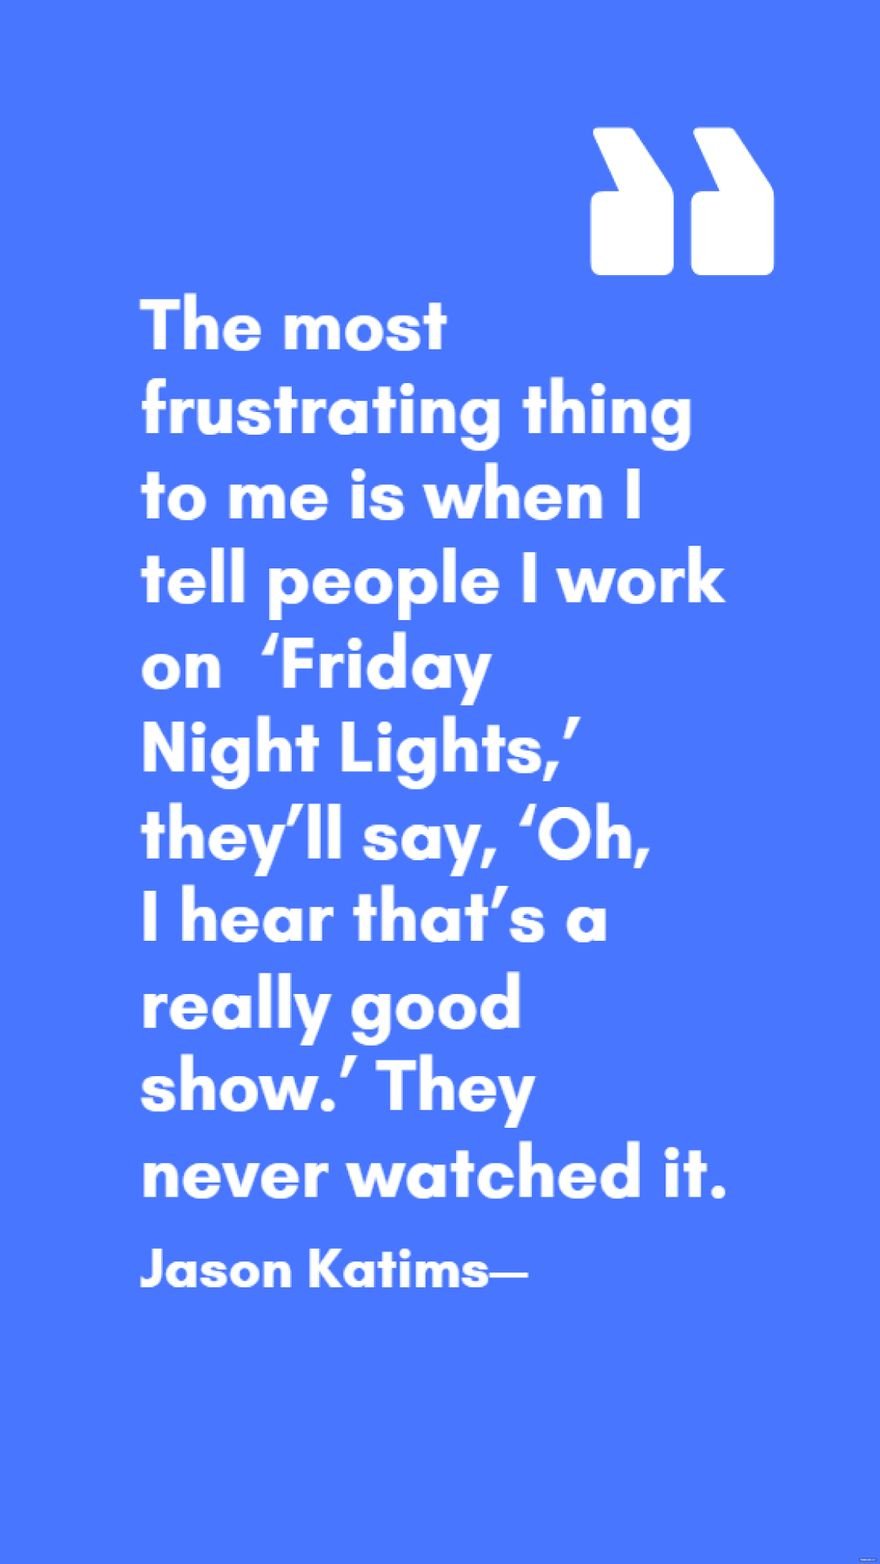 Jason Katims - The most frustrating thing to me is when I tell people I work on ‘Friday Night Lights,’ they’ll say, ‘Oh, I hear that’s a really good show.’ They never watched it. 